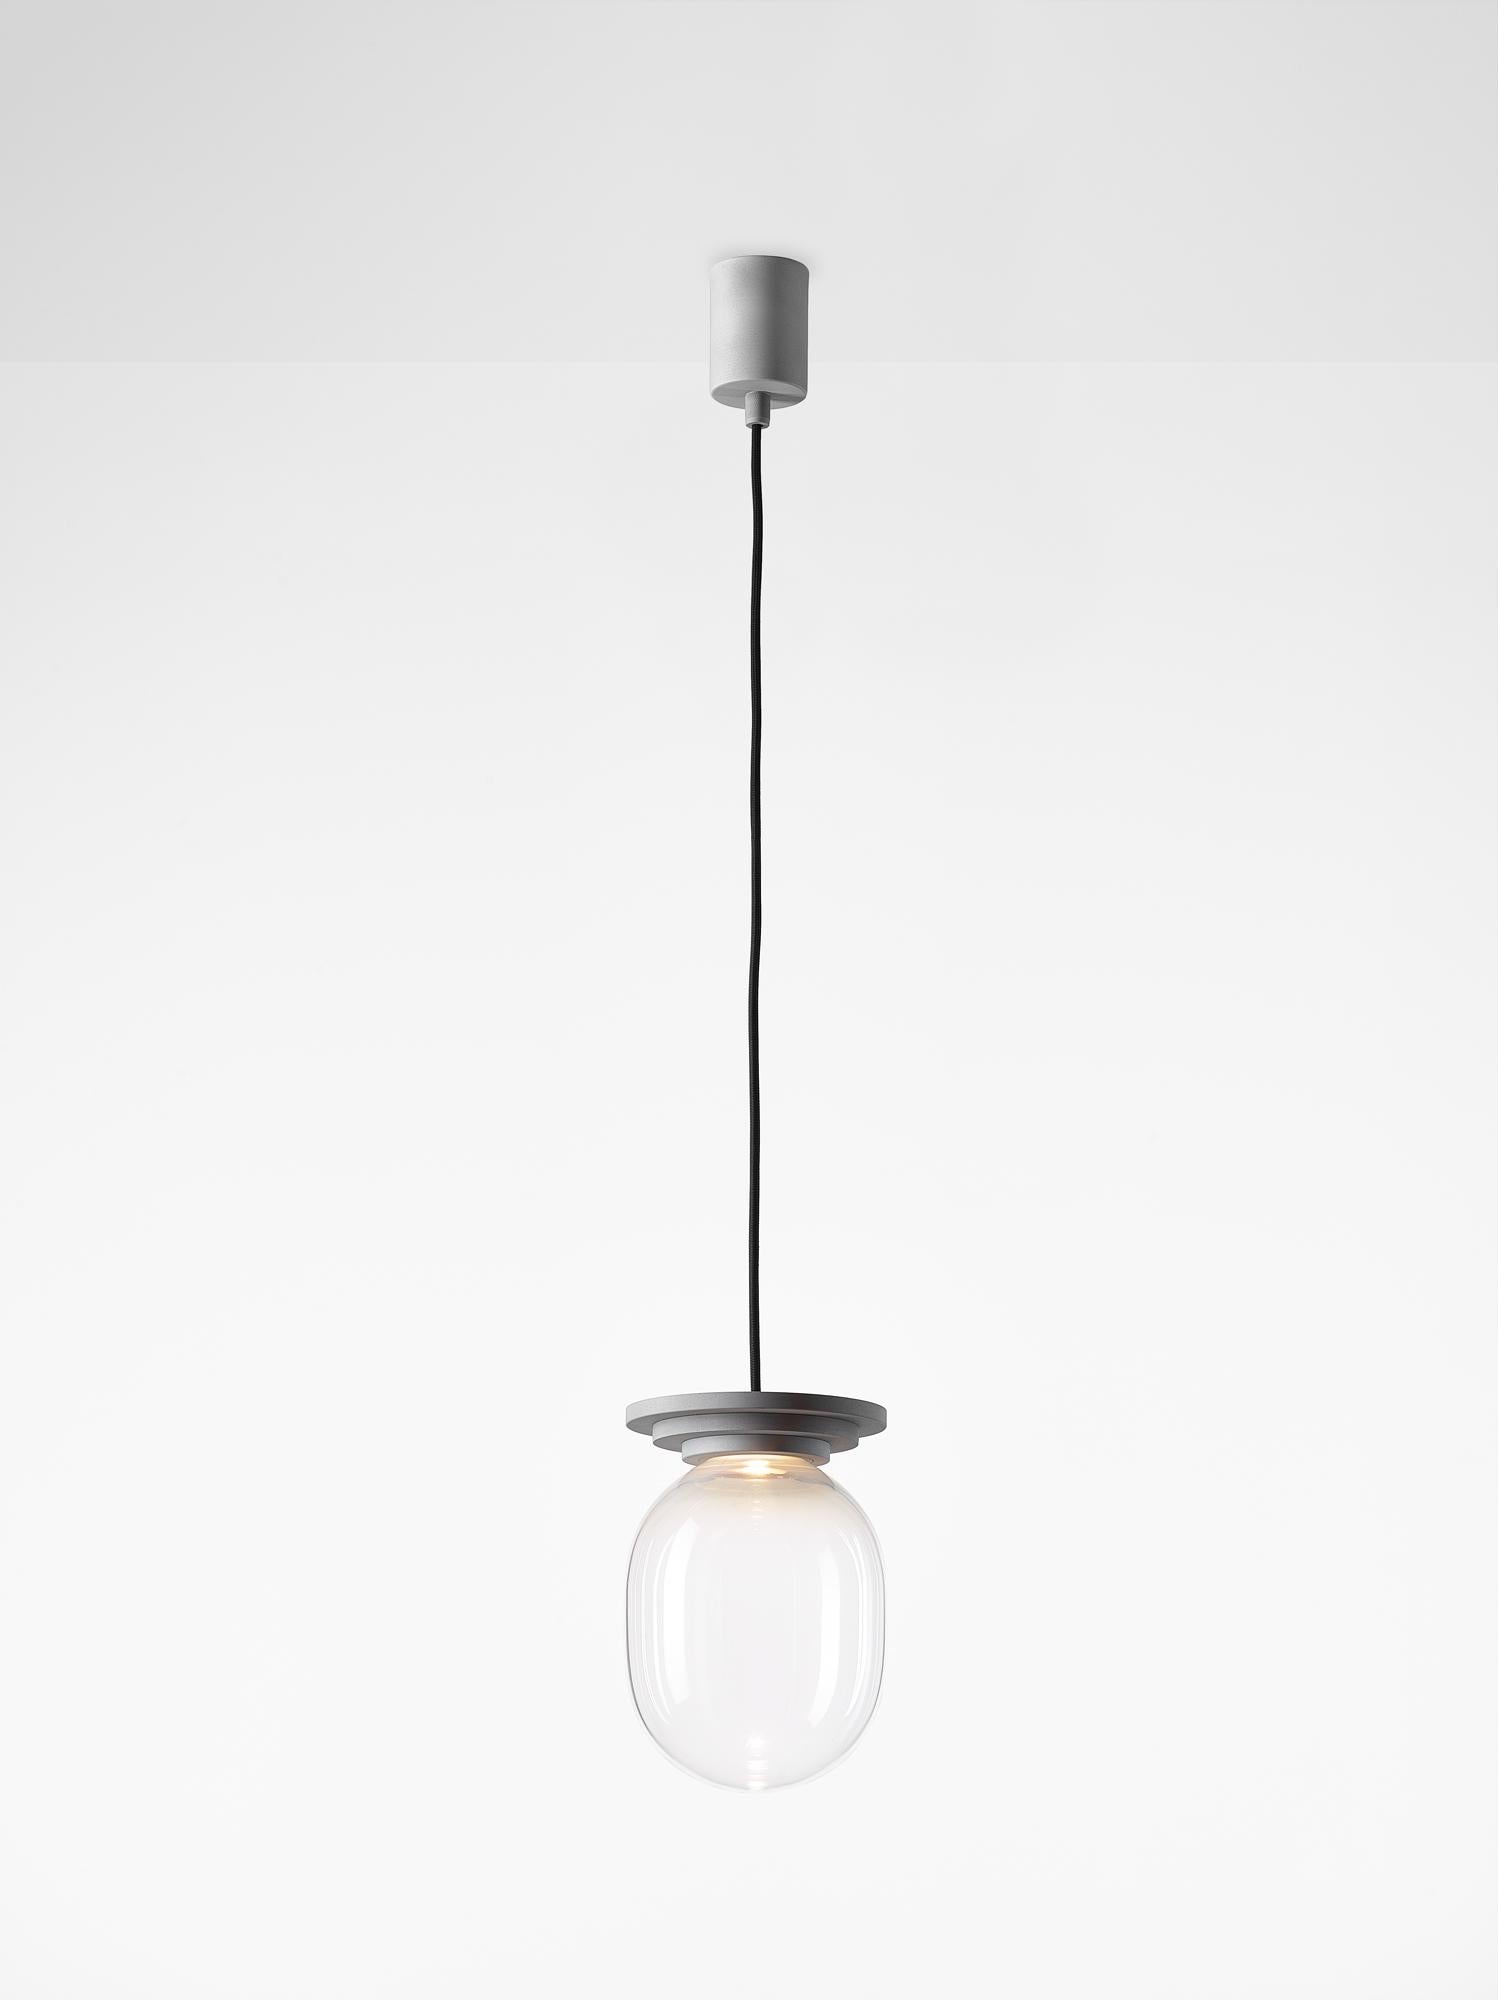 Silver and clear Stratos big capsule pendant light by Dechem Studio
Dimensions: D 20 x H 28 cm
Materials: Aluminium, glass.
Also available: Different colours available.
Different shapes of capsules and spheres contrast with anodized alloy